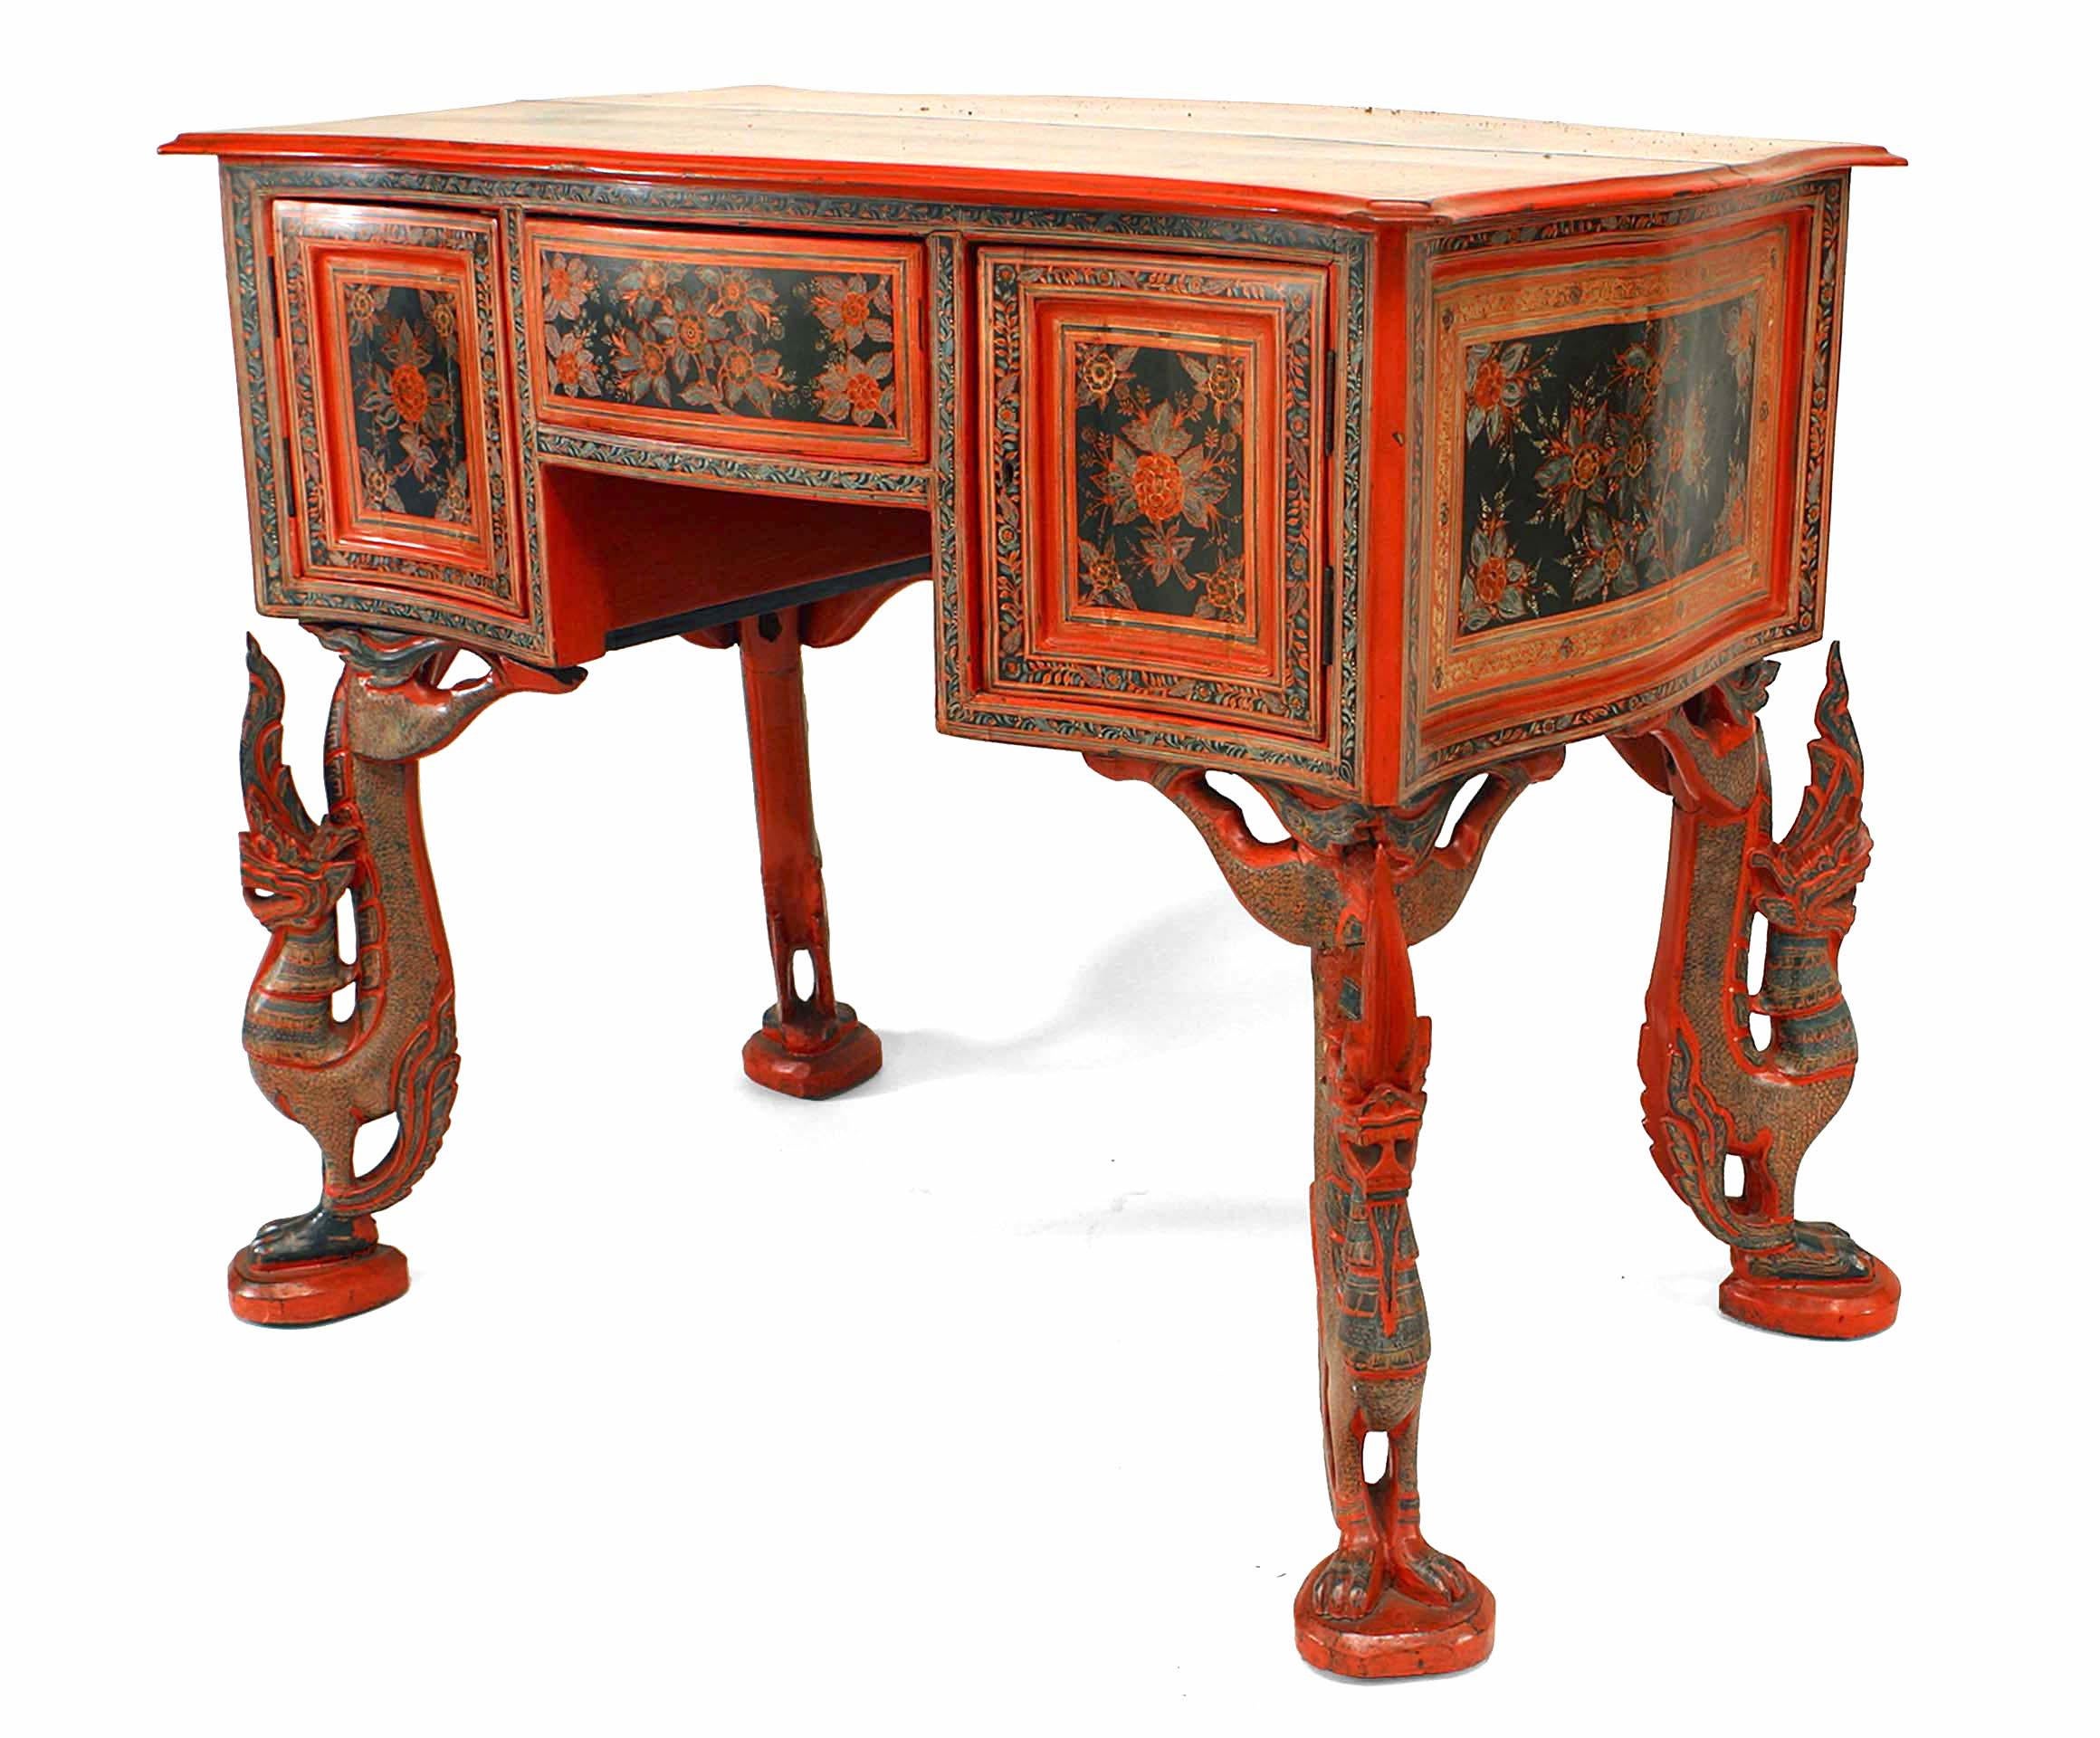 Southeast Asian style (19th Century) red lacquer decorated desk with figural bird legs.
